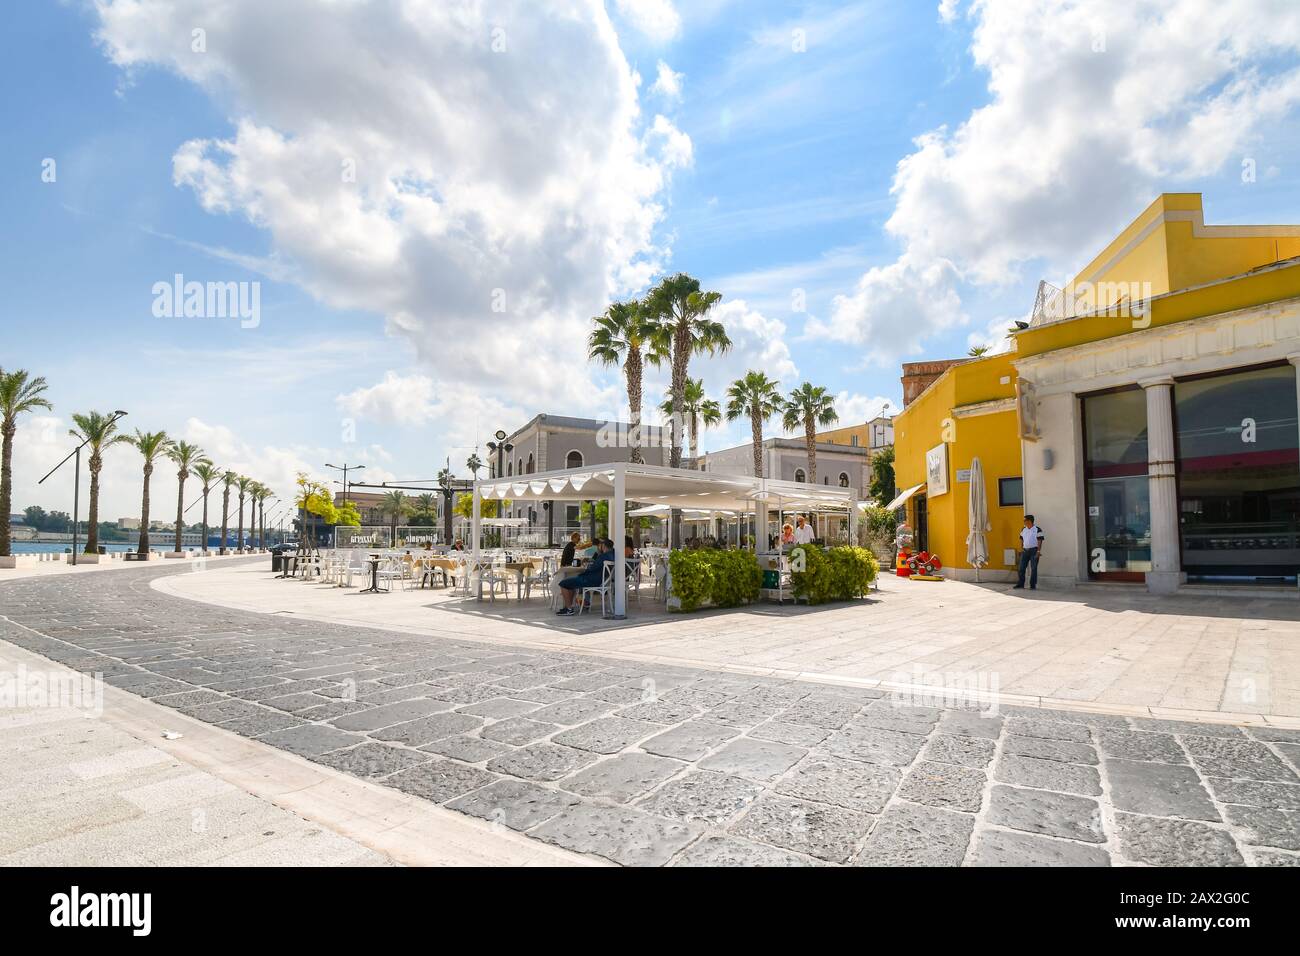 Tourists enjoy a sunny summer day on the waterfront boardwalk at the port city of Brindisi Italy in the region of Puglia Stock Photo